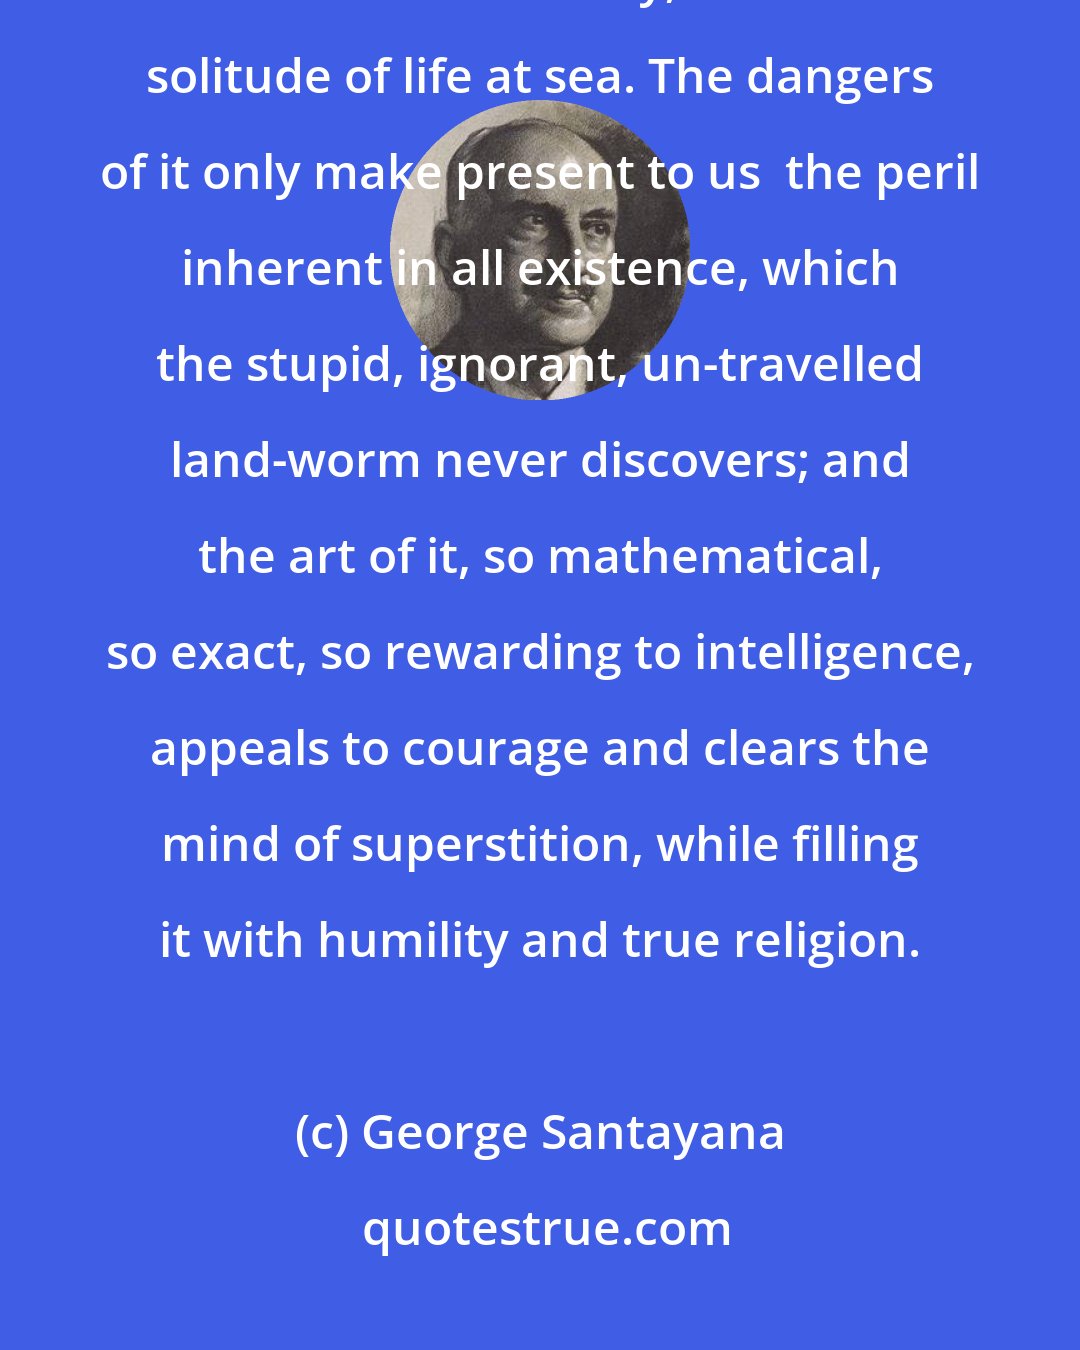 George Santayana: I love moving water, I love ships, I love the sharp definition, the concentrated humanity, the sublime solitude of life at sea. The dangers of it only make present to us  the peril inherent in all existence, which the stupid, ignorant, un-travelled land-worm never discovers; and the art of it, so mathematical, so exact, so rewarding to intelligence, appeals to courage and clears the mind of superstition, while filling it with humility and true religion.